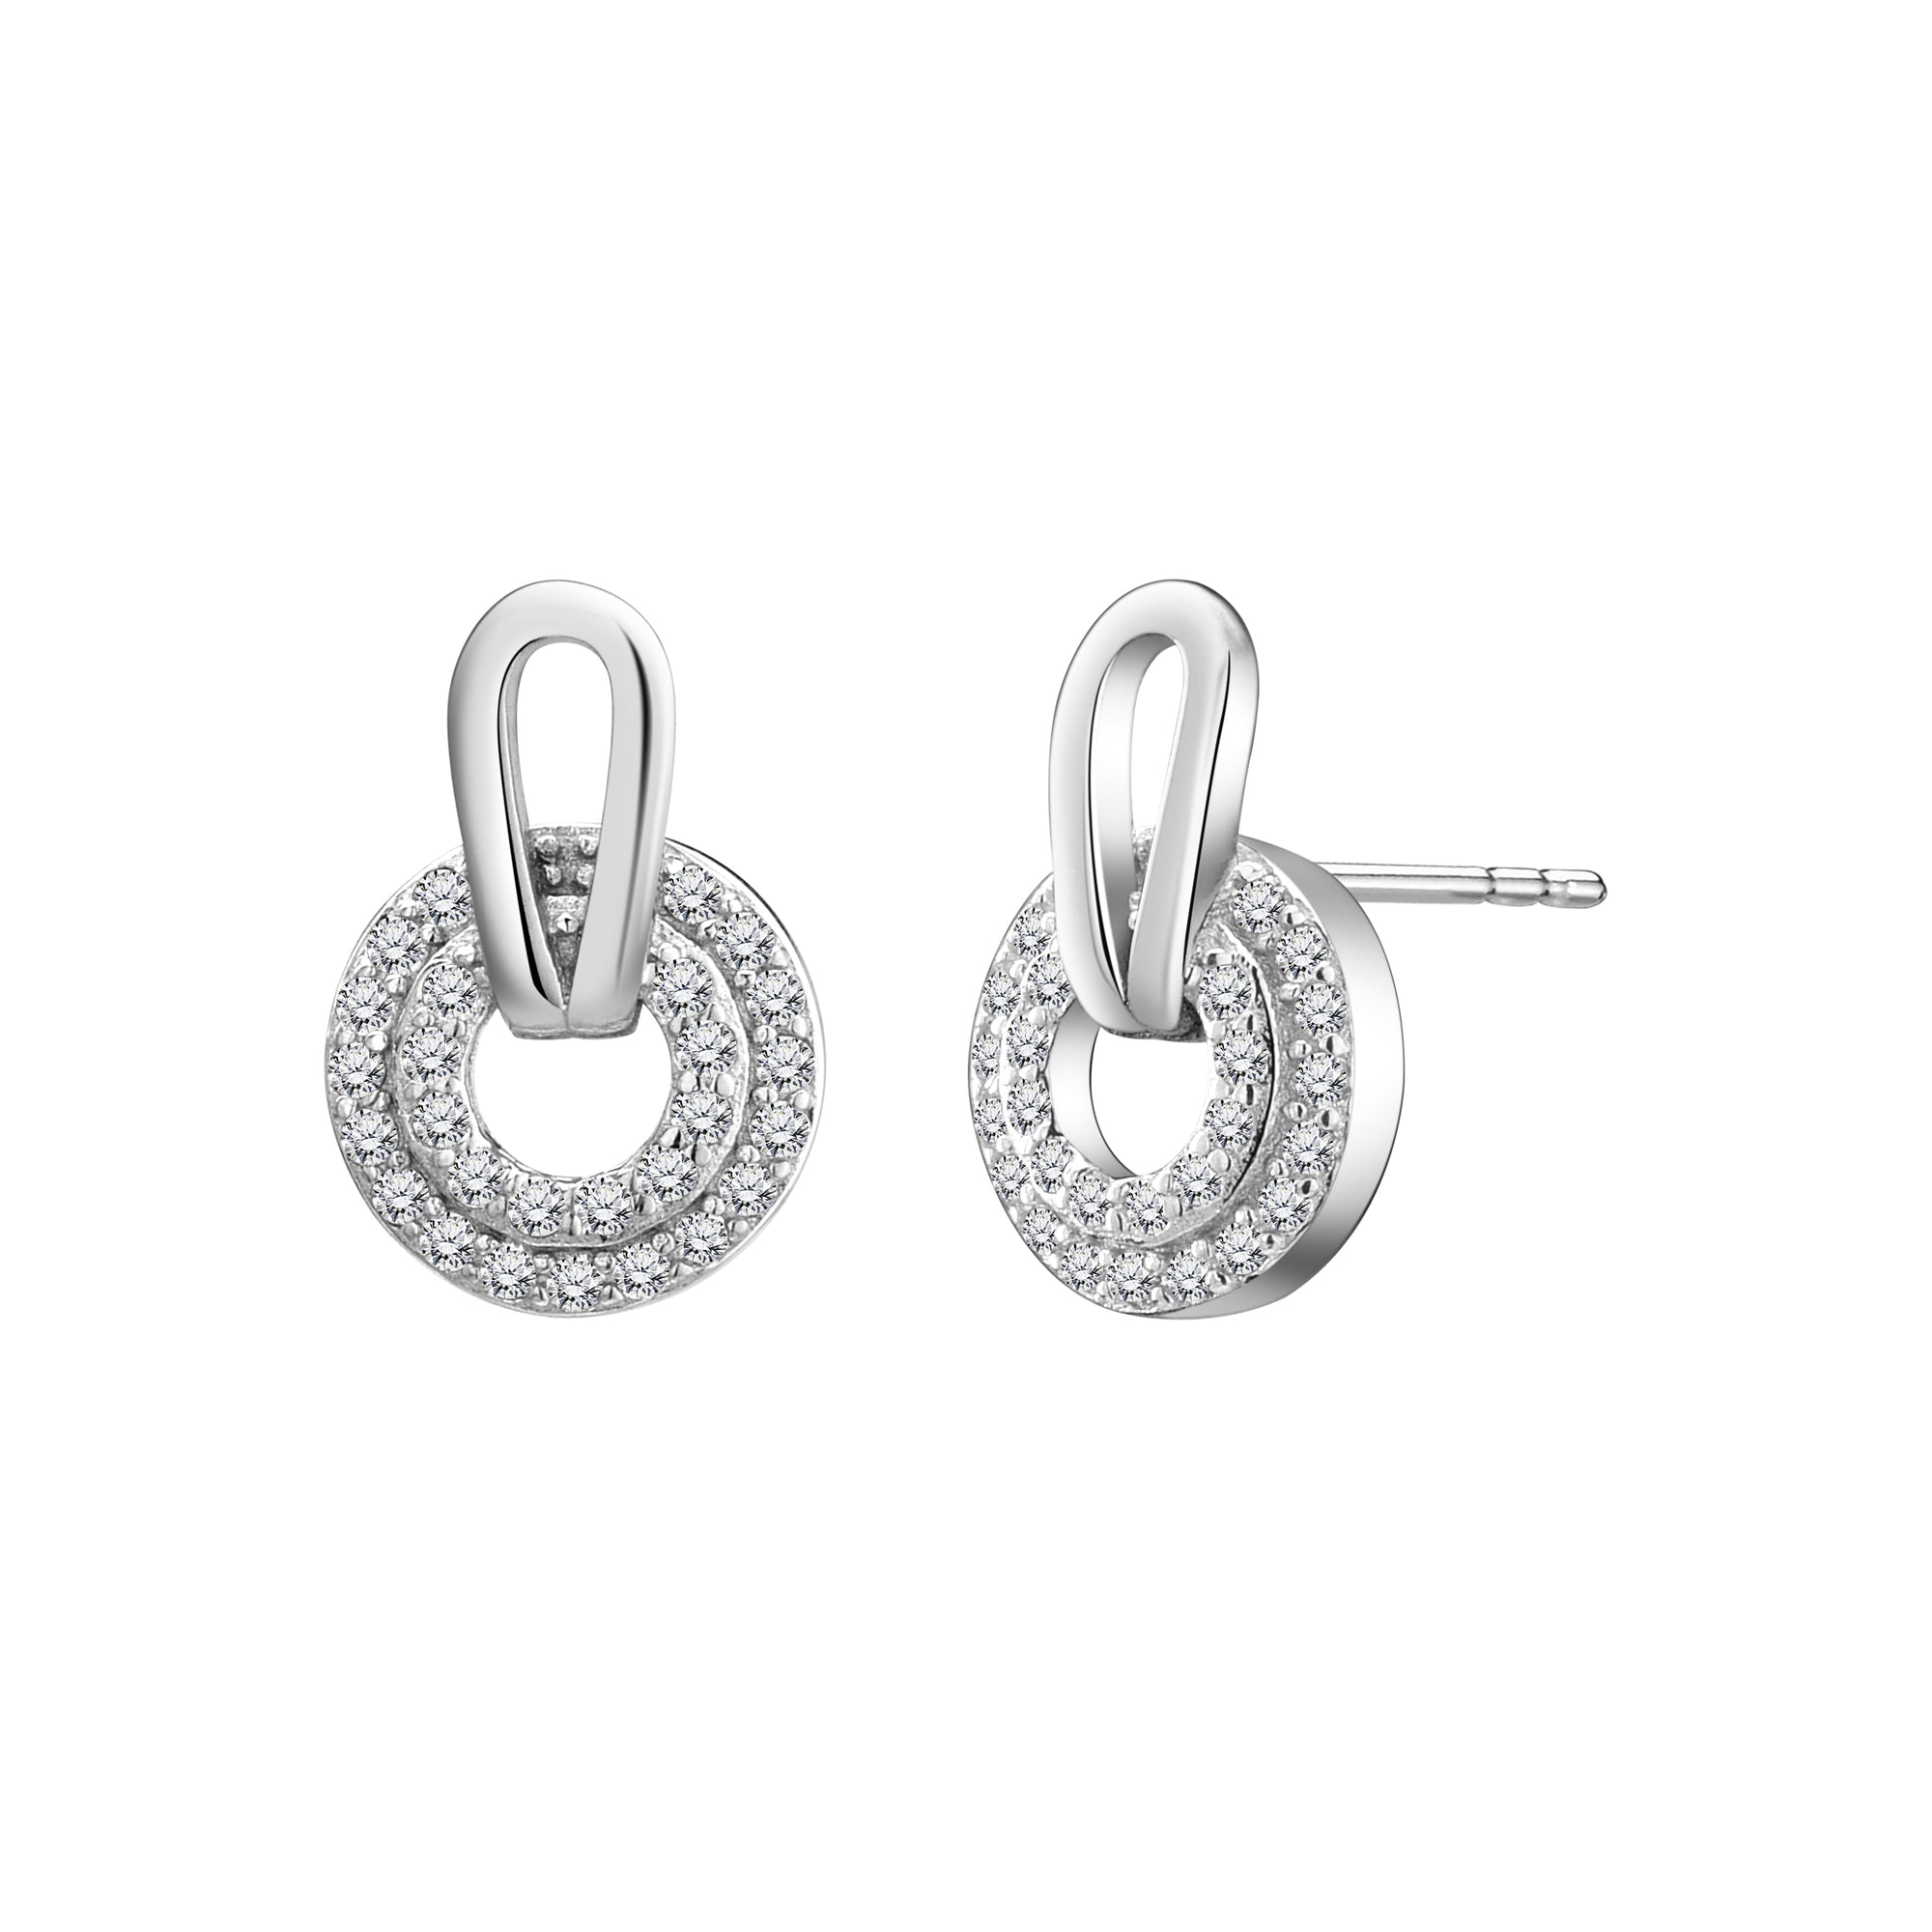 925 STERLING SILVER PAVE RING PENDANT EARRINGS